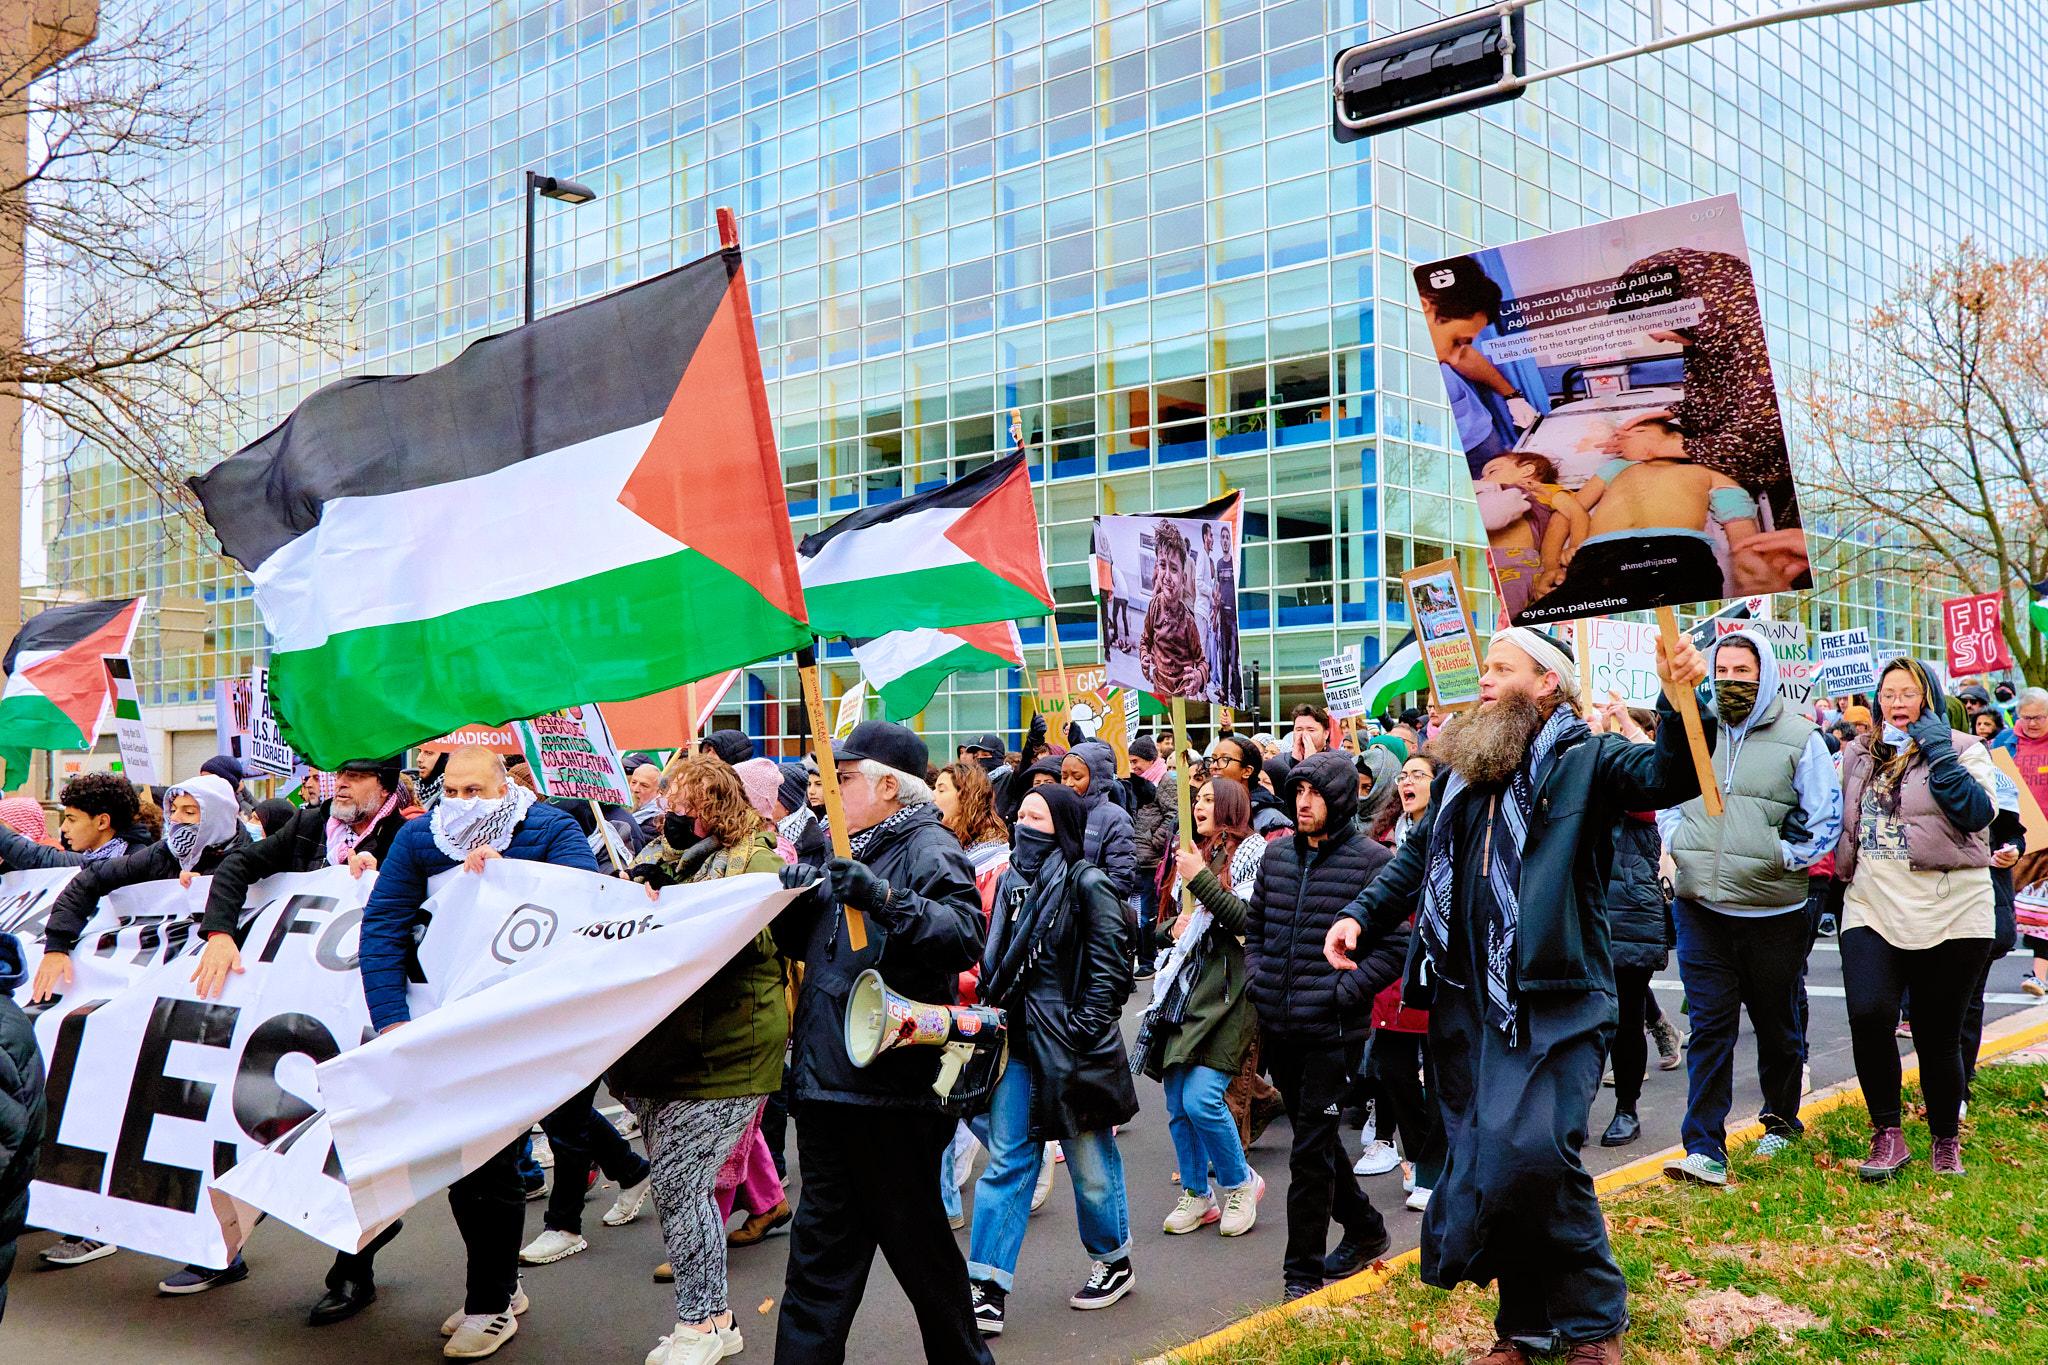 Wisconsin All Out for Palestine March and Rally - 